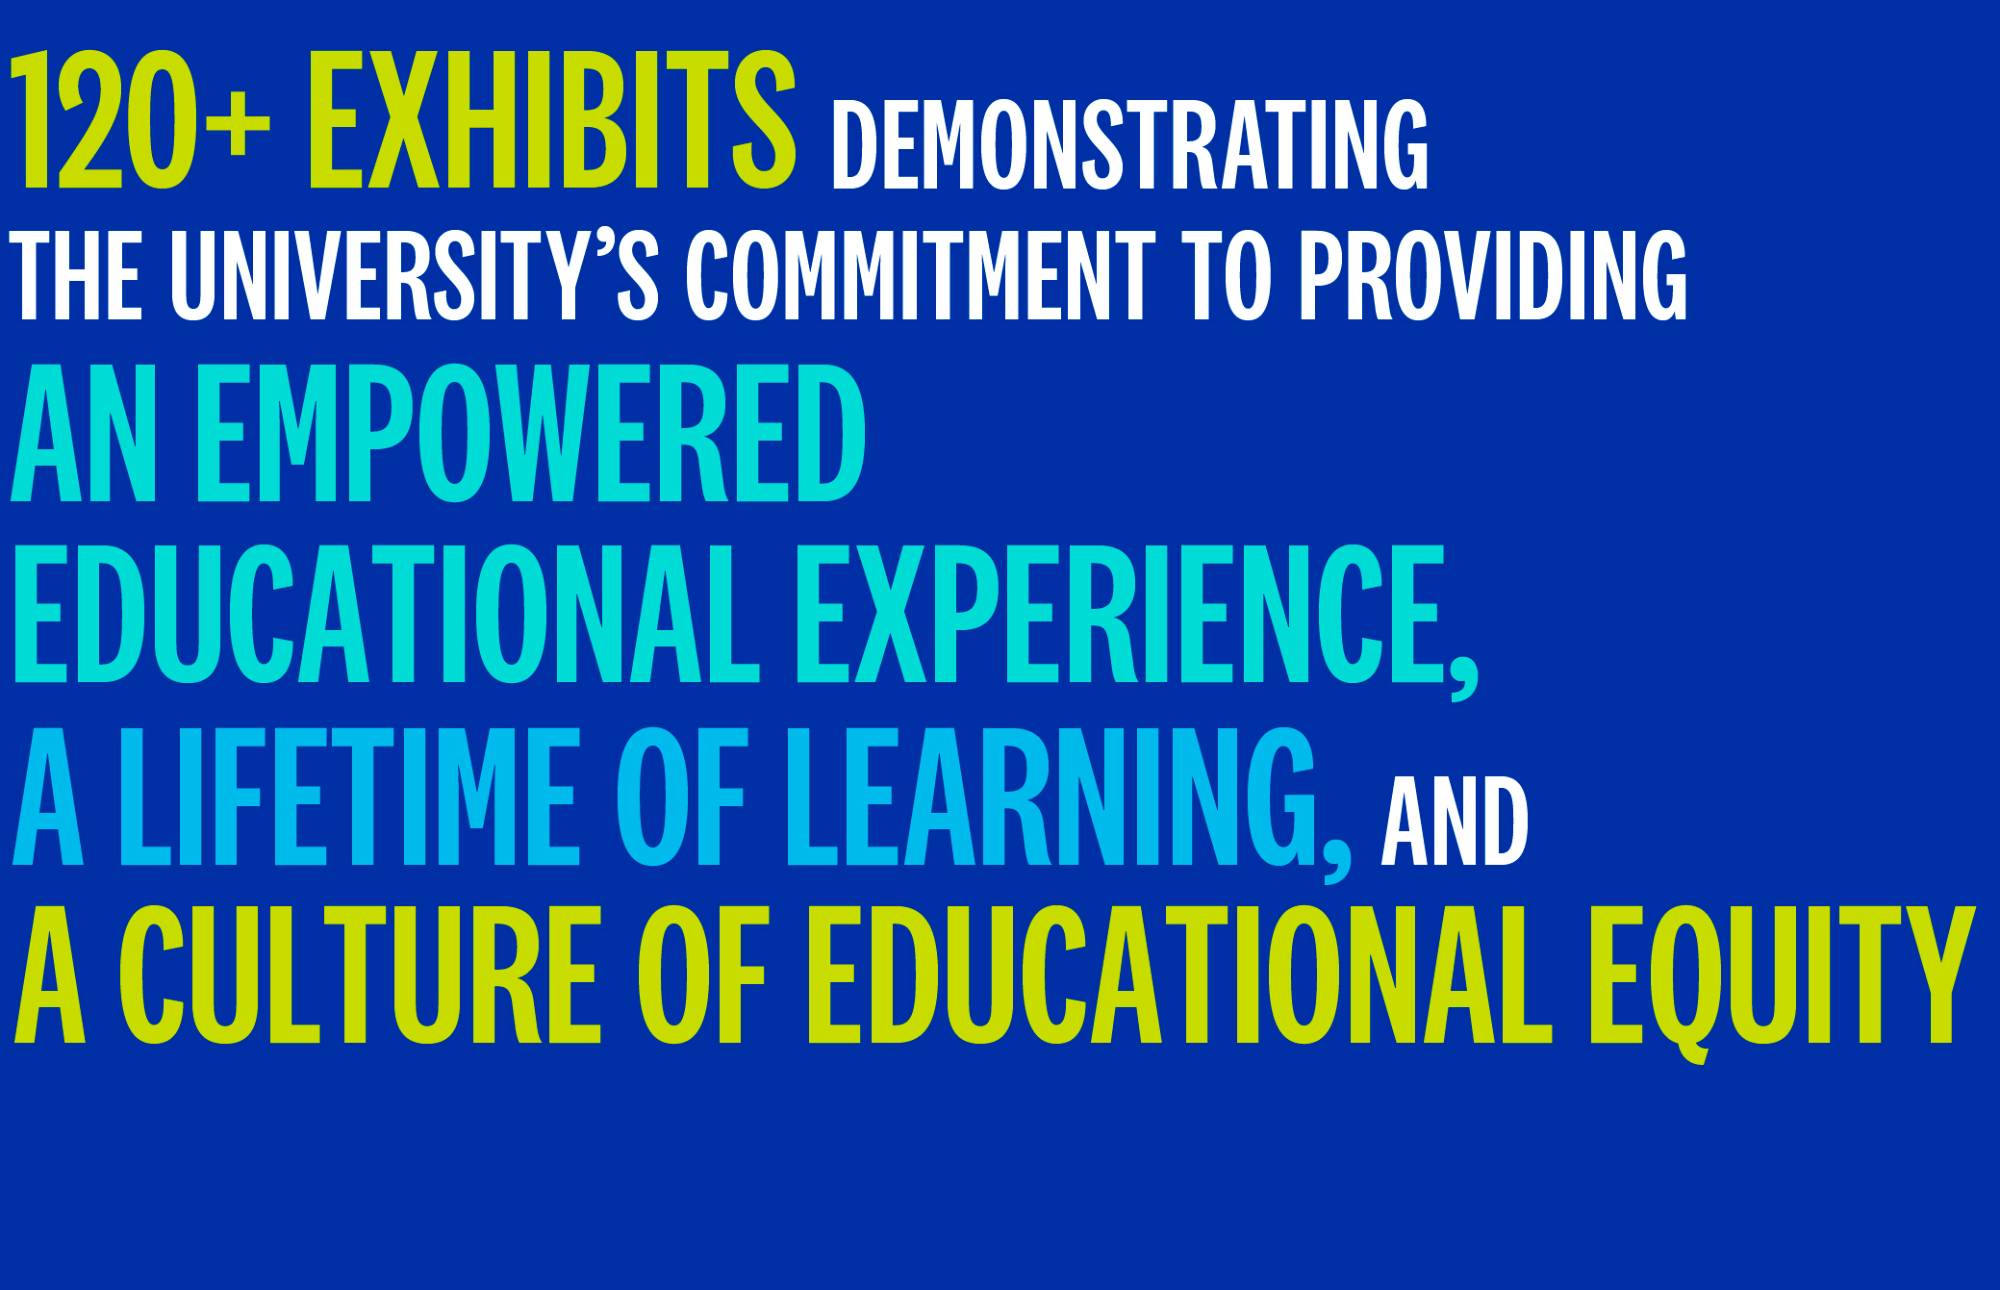 120+ exhibits demonstrating the university's commitment to providing an empowered educational experience, a lifetime of learning, and a culture of educational equity